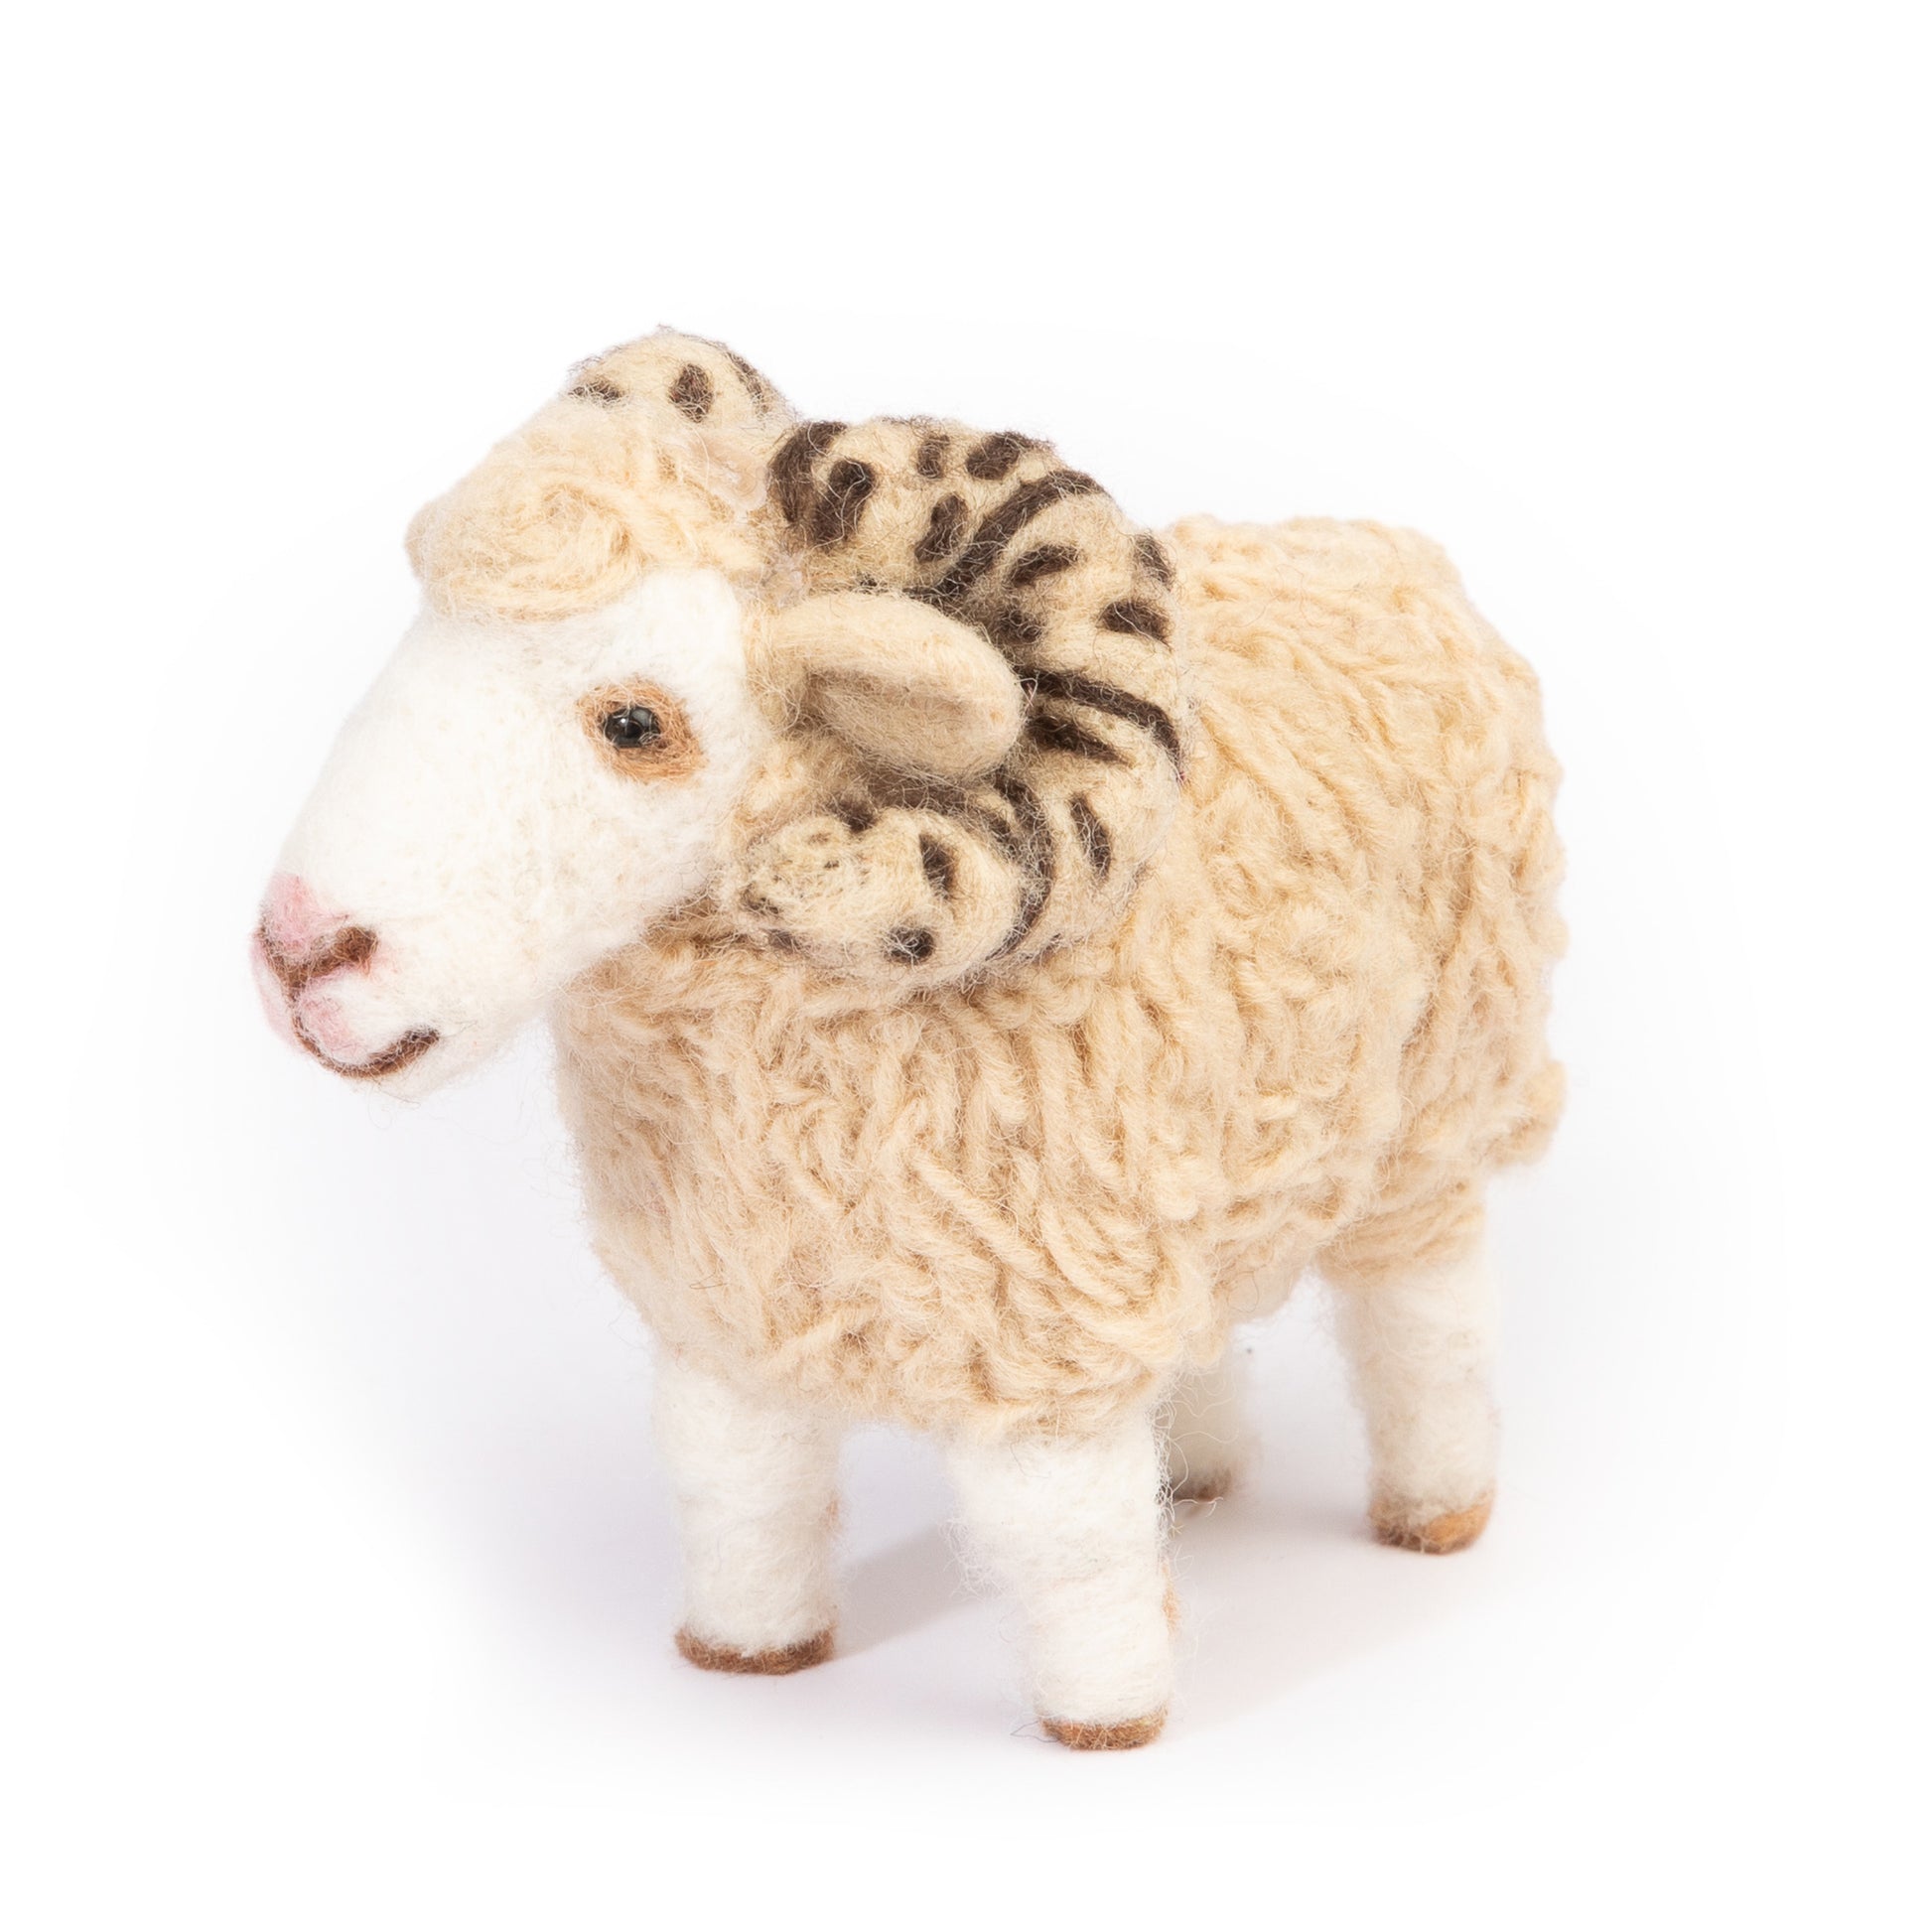 Handcrafted felt wool sheep figurine with intricate detailing, perfect for home décor or as a children's toy